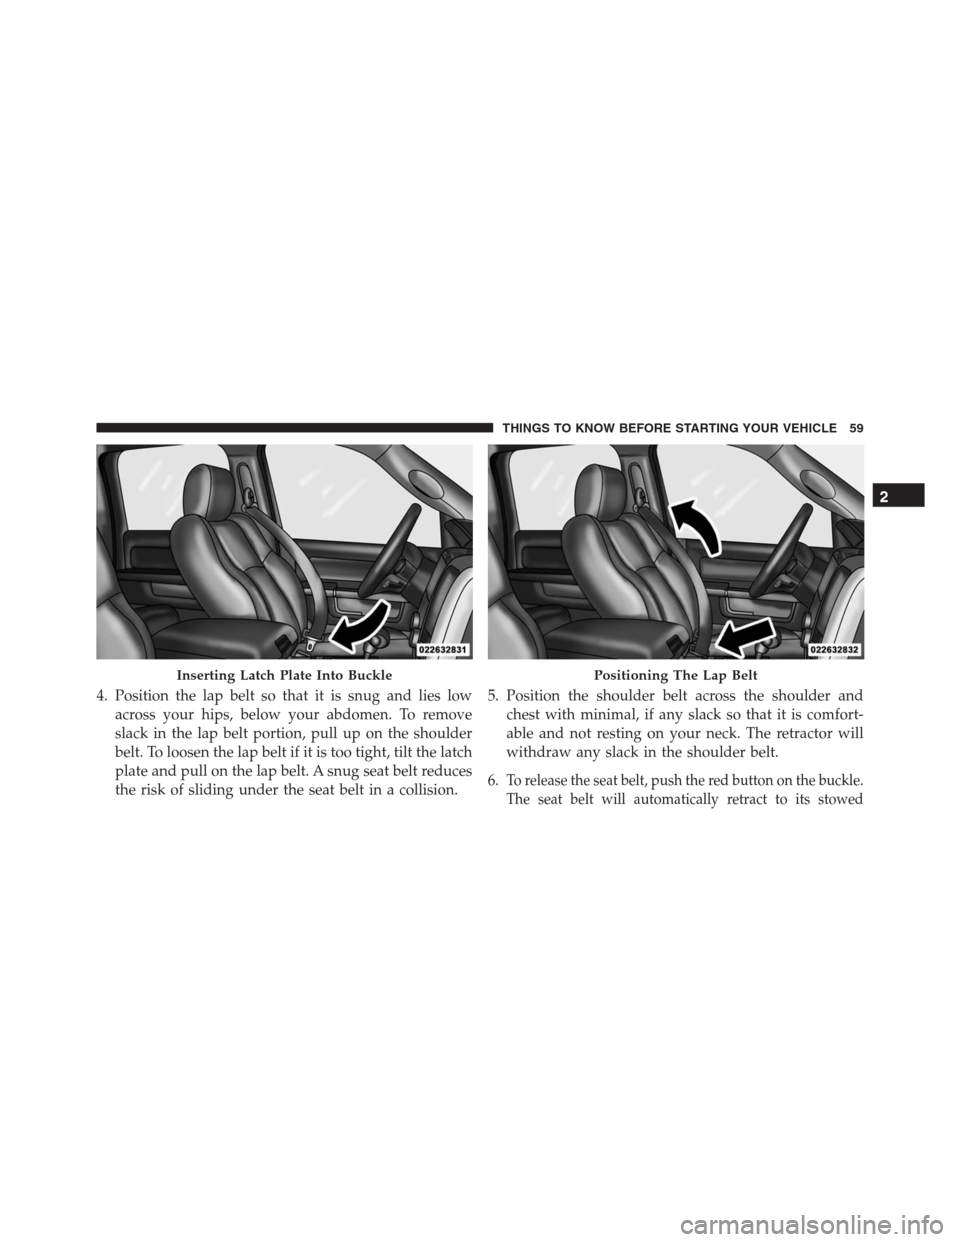 Ram 1500 2016  Owners Manual 4. Position the lap belt so that it is snug and lies low
across your hips, below your abdomen. To remove
slack in the lap belt portion, pull up on the shoulder
belt. To loosen the lap belt if it is to